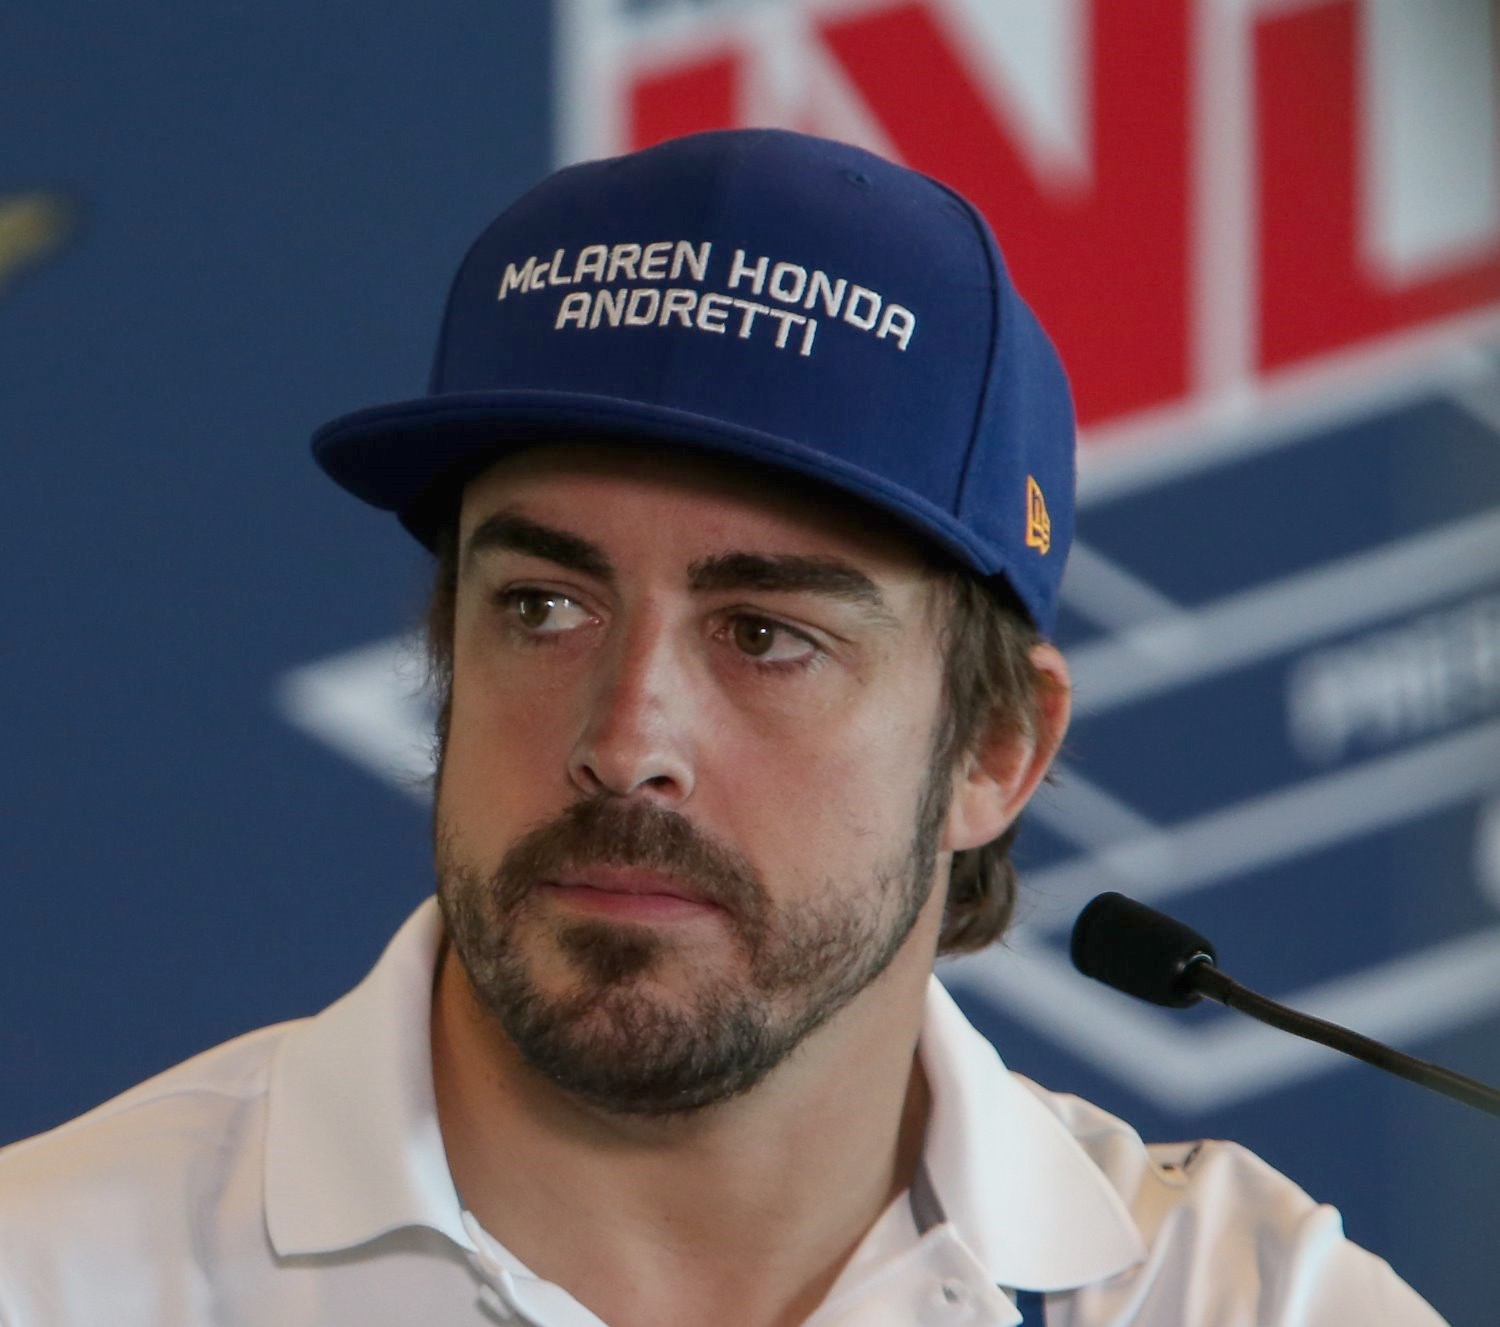 Alonso said a full-time season in IndyCar was never the plan for 2019, yet this week he said he was trying to figure out a way to fit in two championships into his 2019 schedule. WEC is one. Is IndyCar the 2nd and now back on the table?